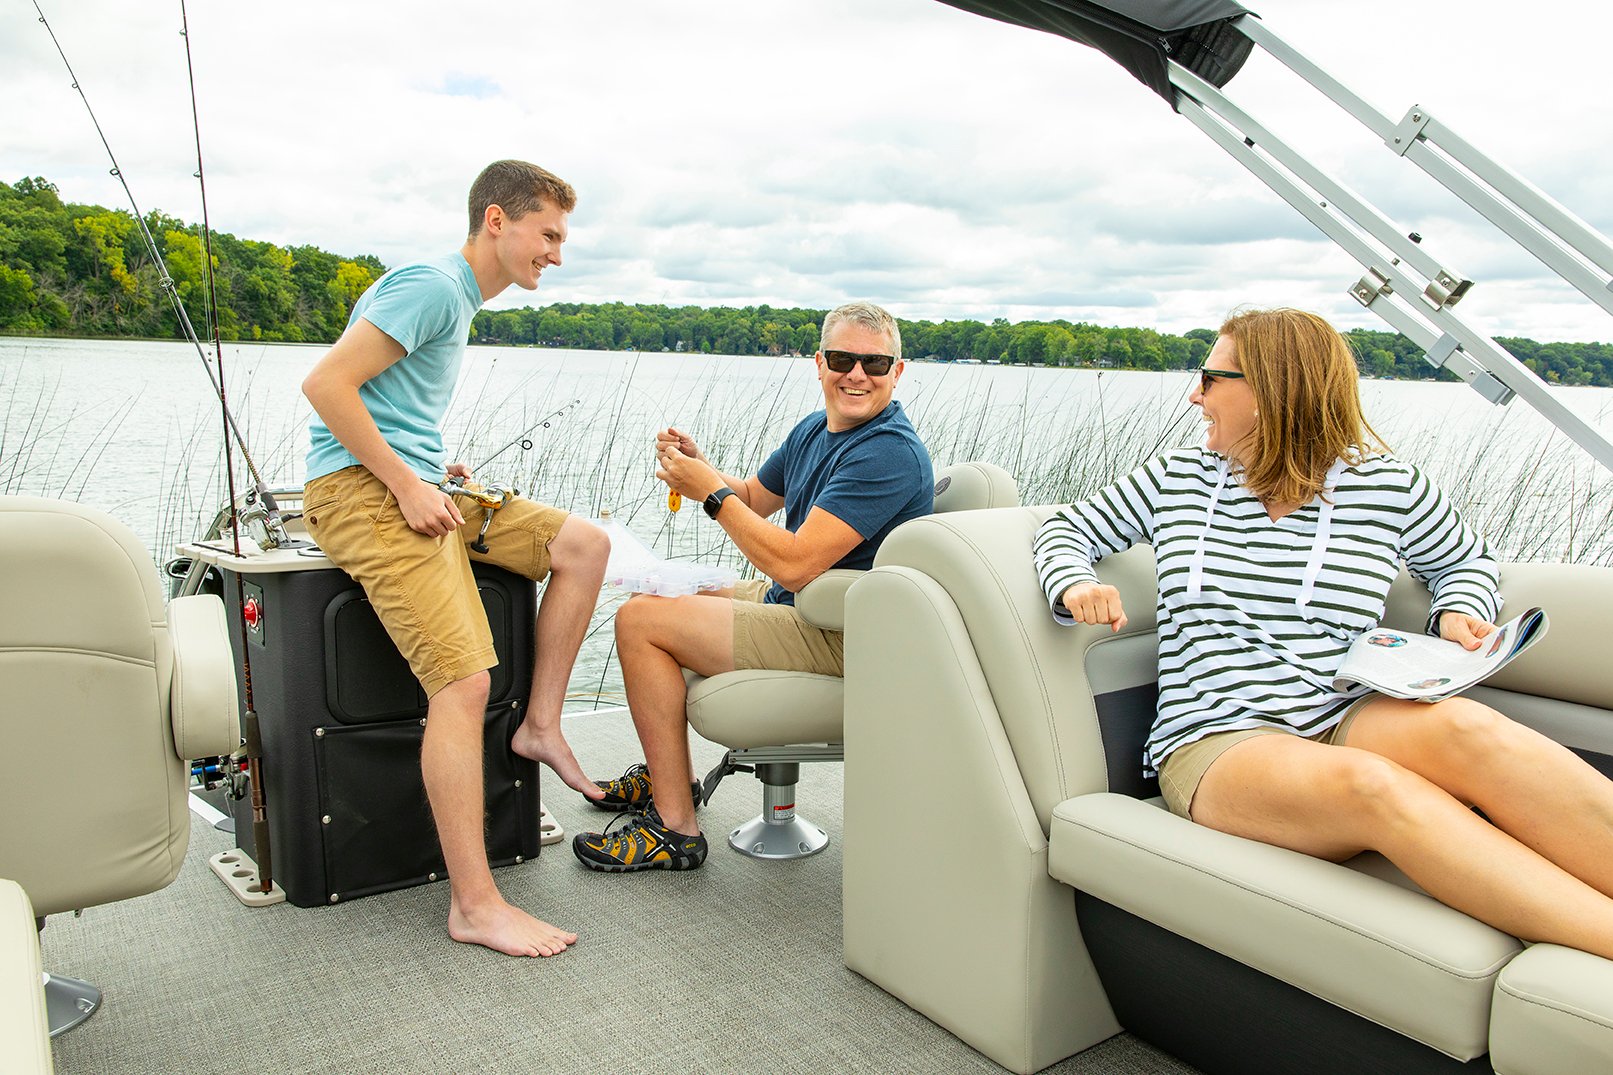 The Best Boat Accessories for 2022 - Accessories for Your Boat